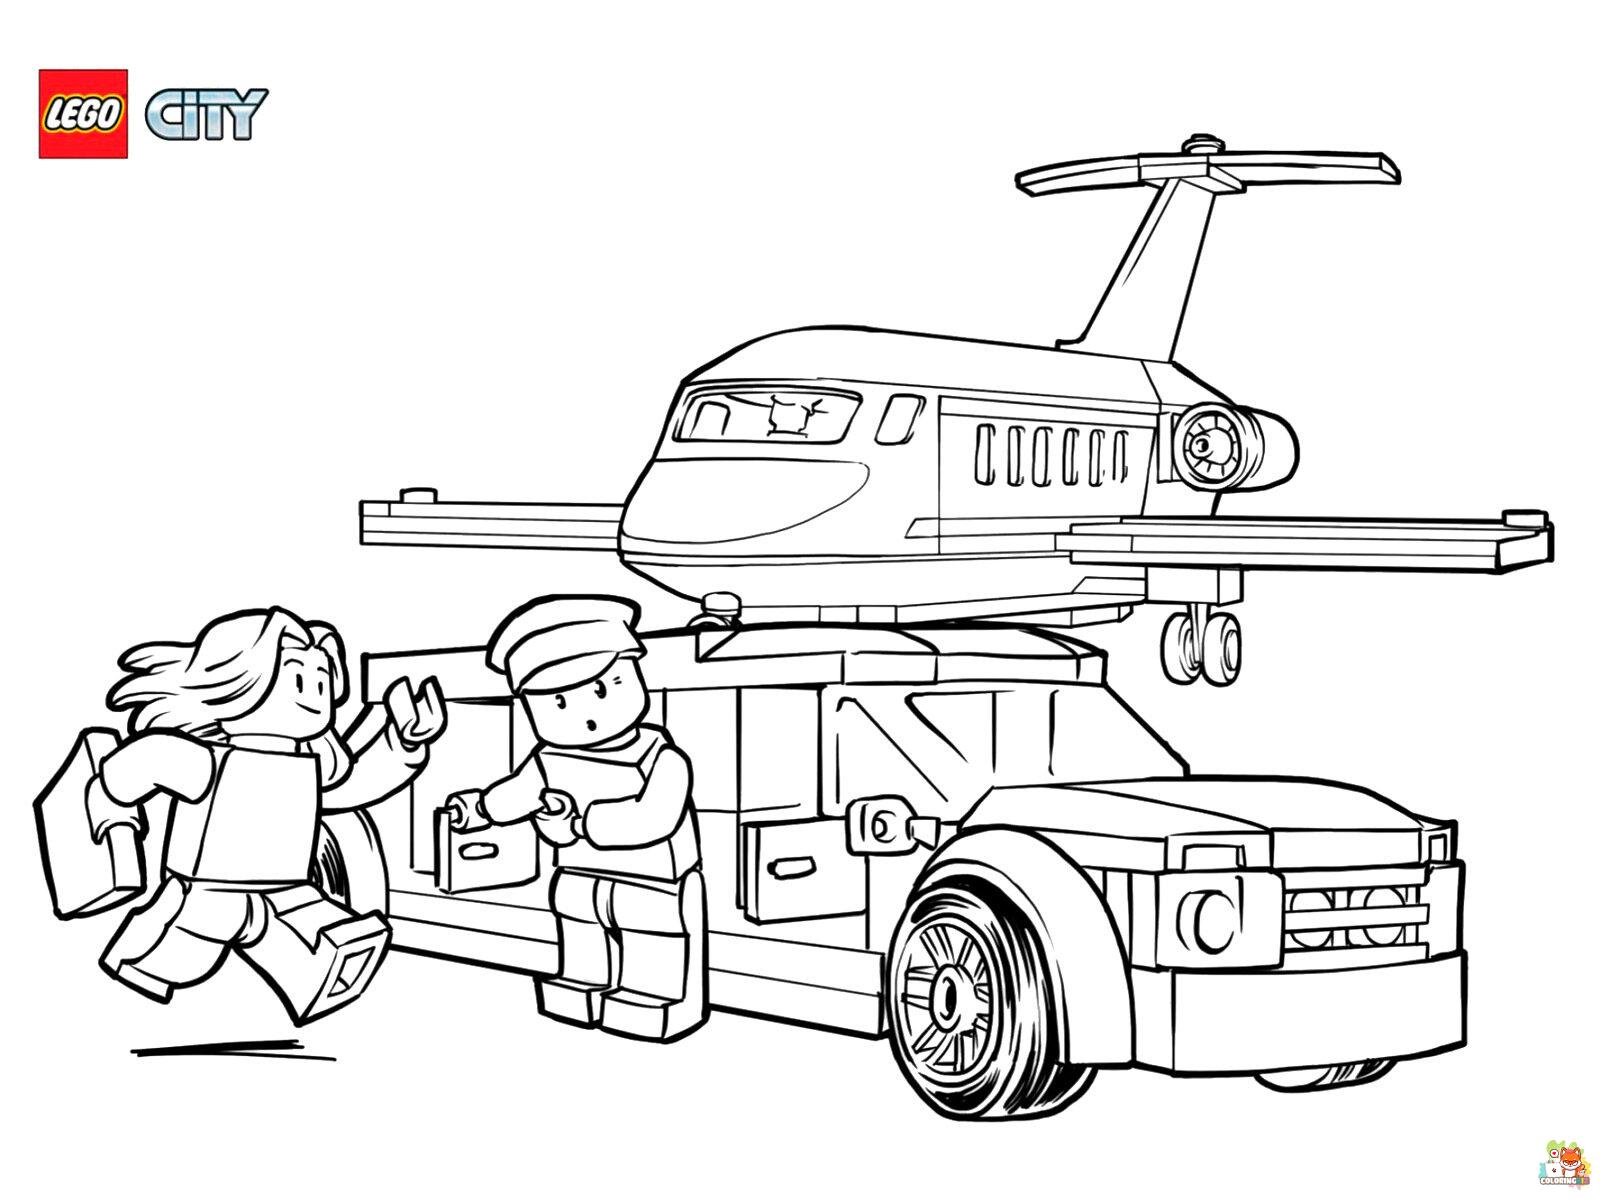 Lego City Coloring Pages 15 1